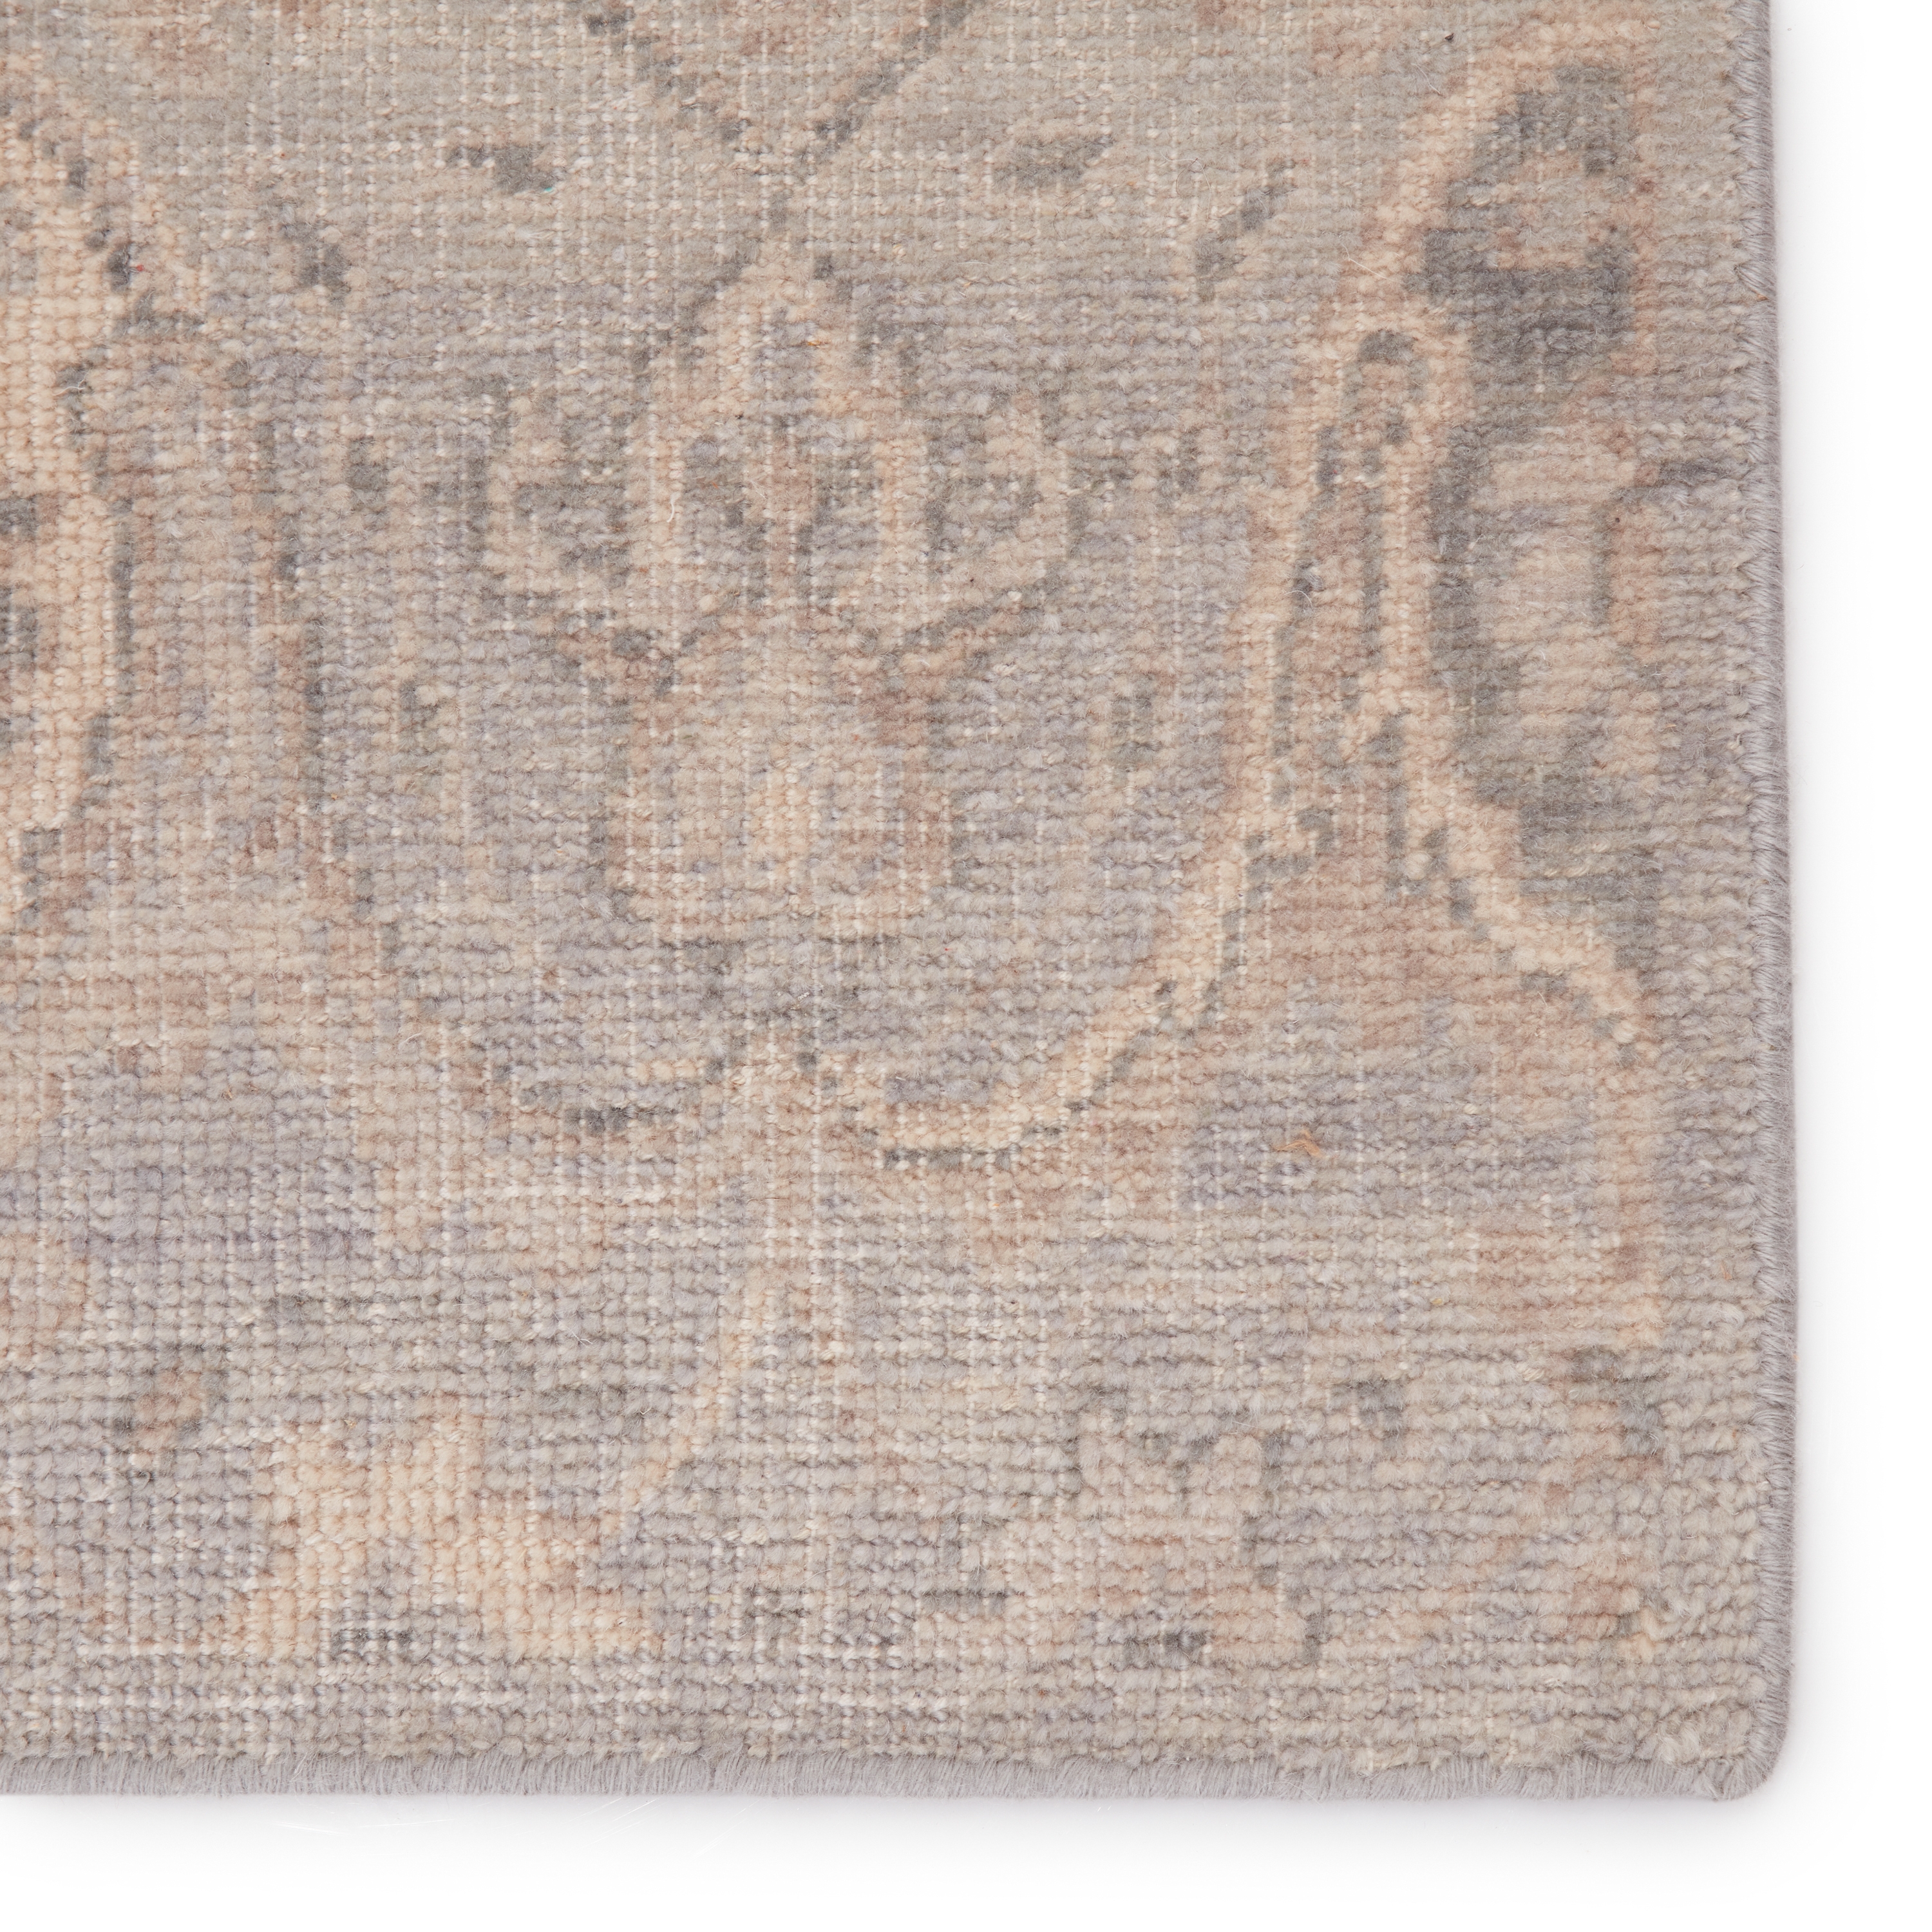 Williamsburg Hand-Knotted Trellis Gray/ Beige Area Rug (6'X9') - Image 3